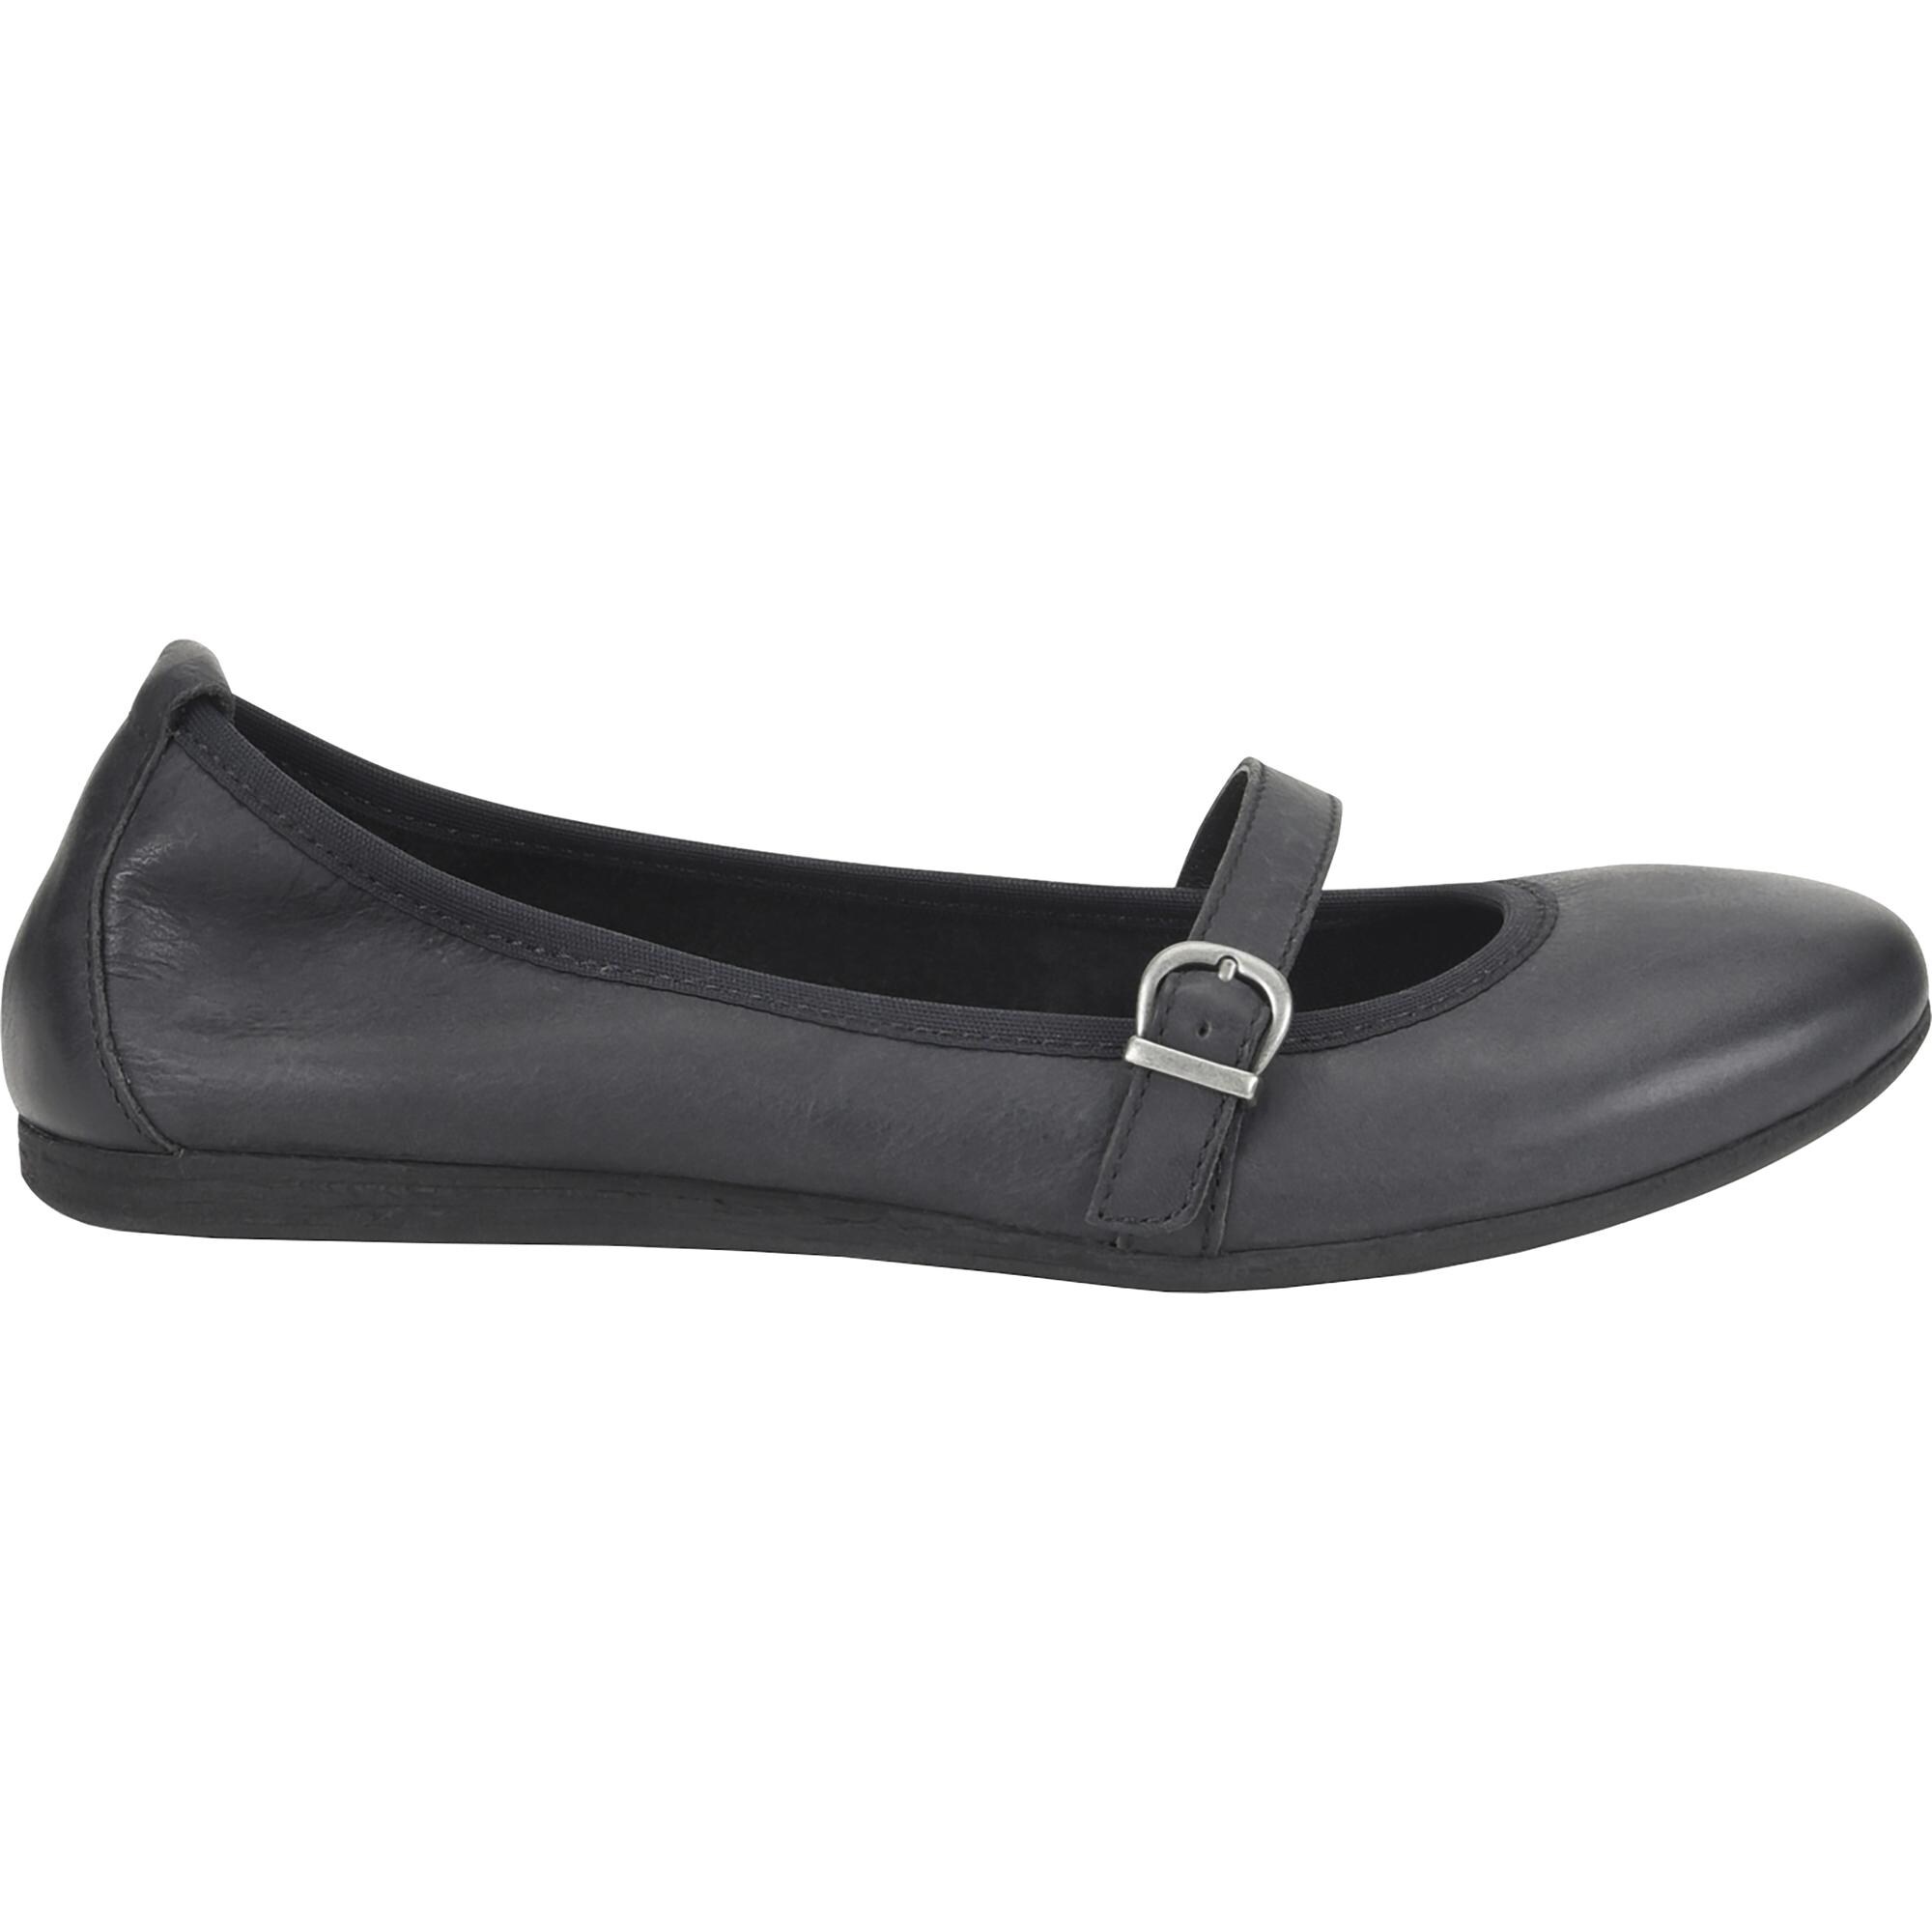 born curlew mary jane flats